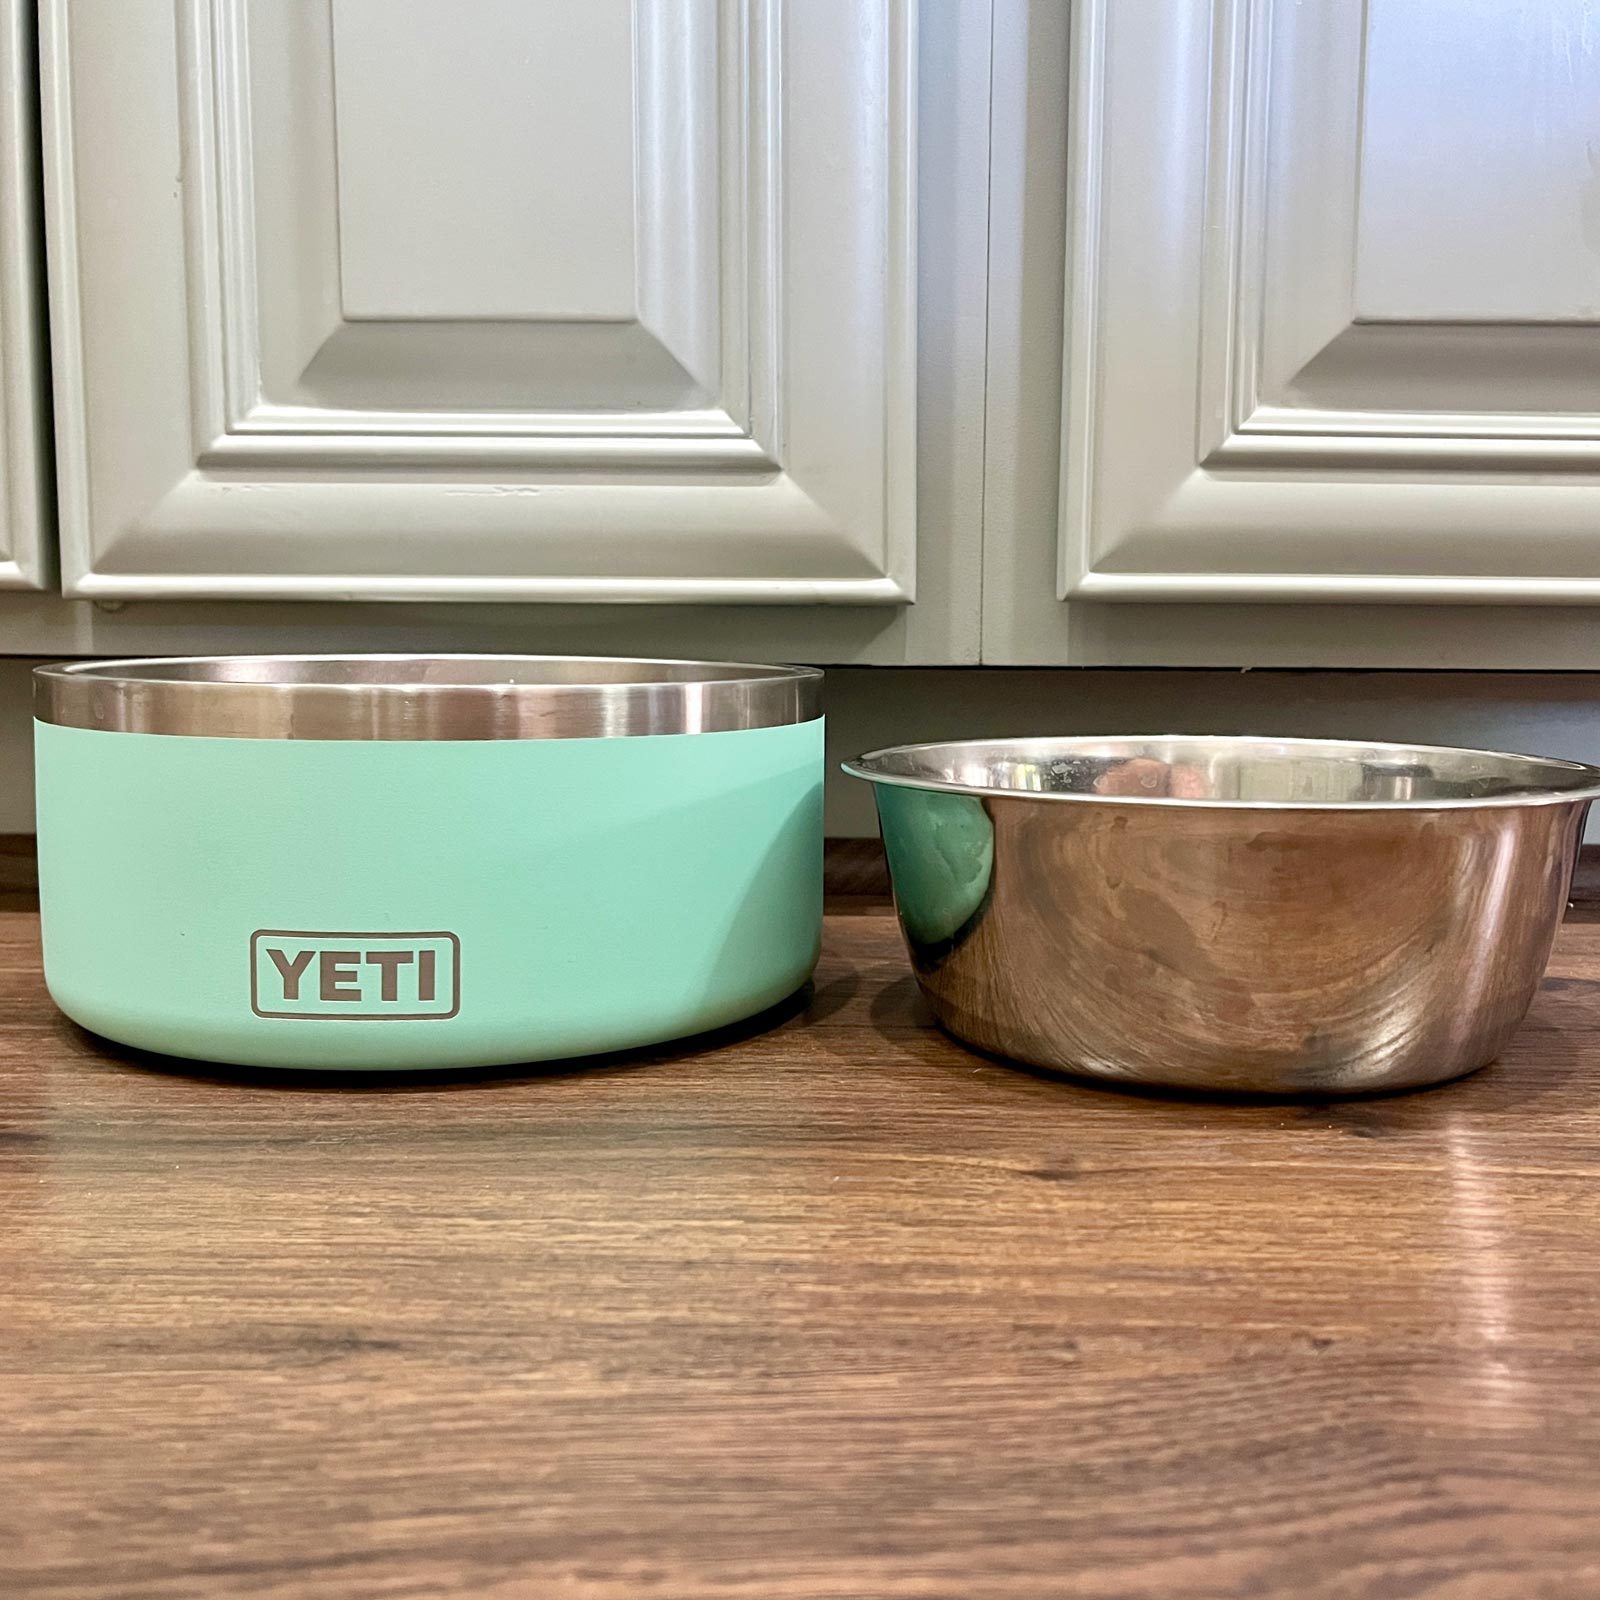 Yeti Boomer Dog Bowl Reviews: Does It Hold Up? - Paw of Approval - The Dodo